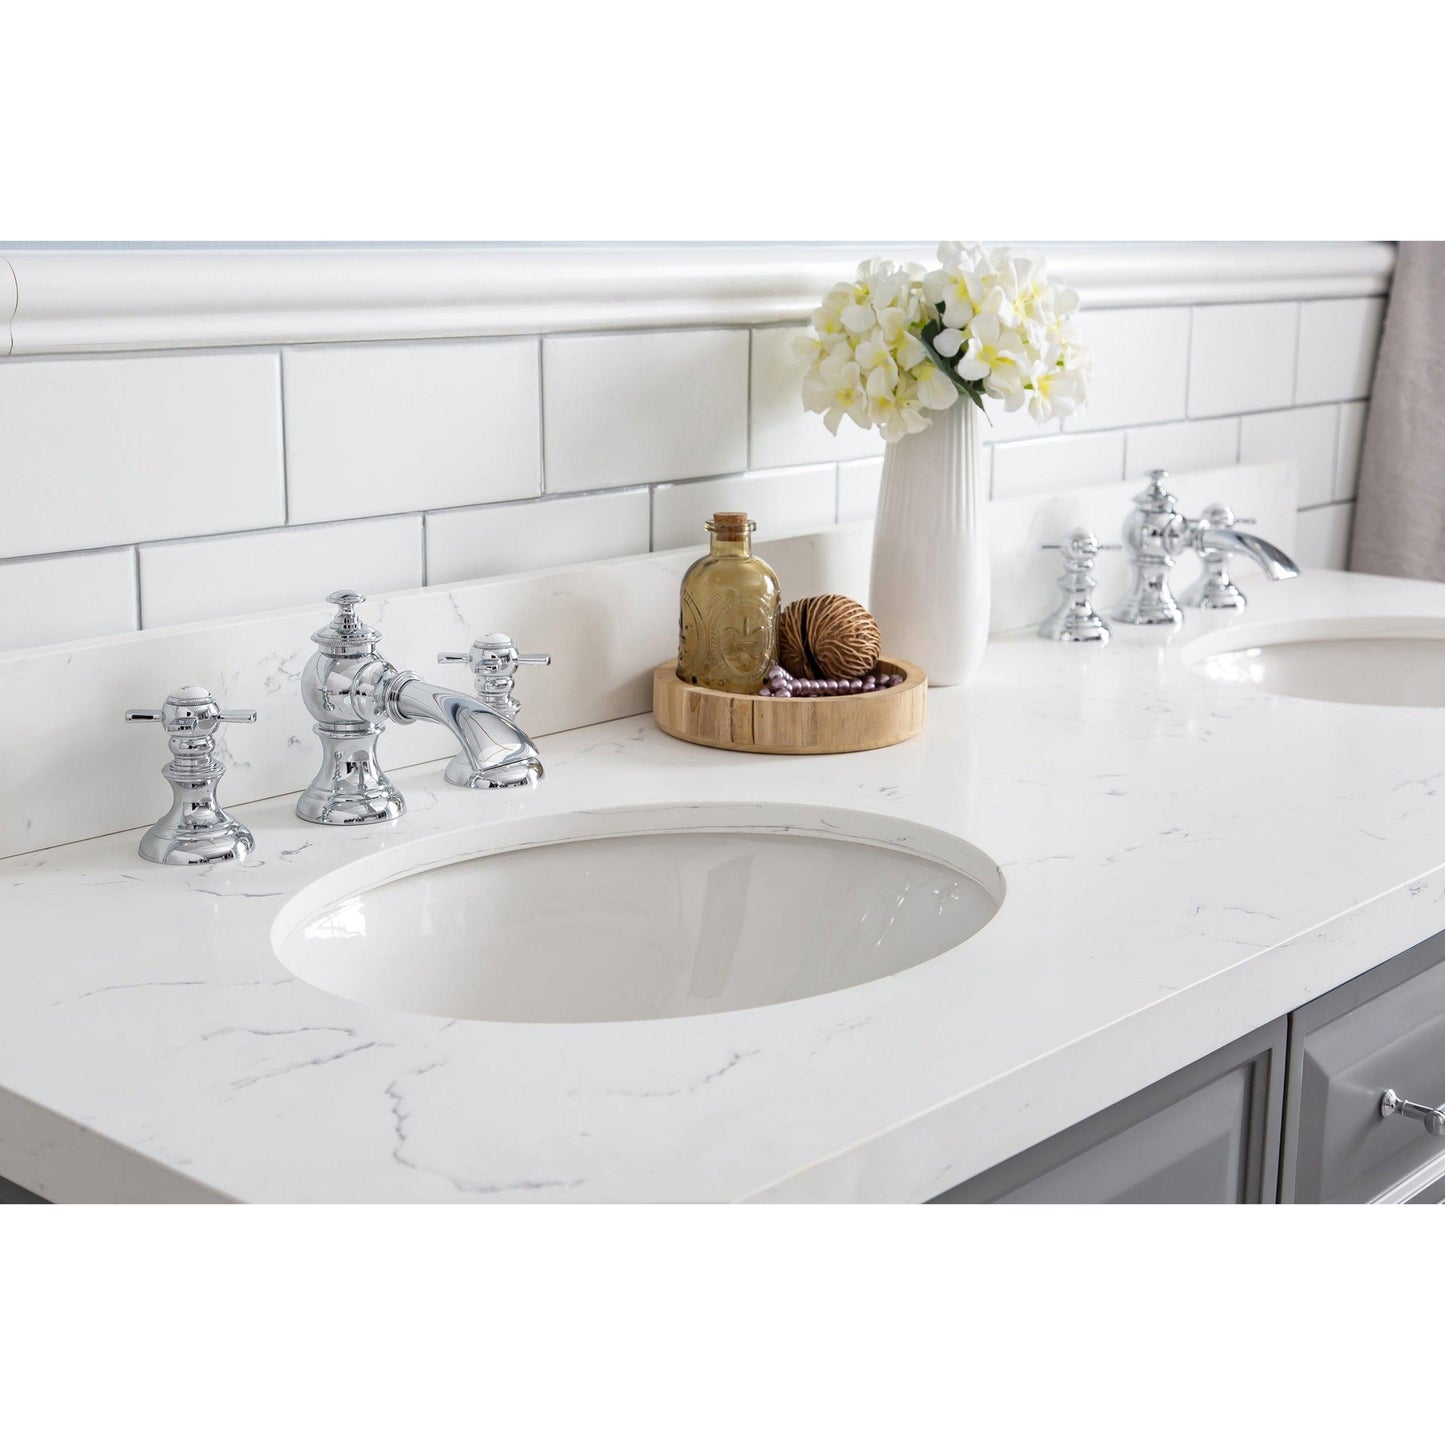 Water Creation Palace 60" Quartz Carrara Cashmere Grey Bathroom Vanity Set With Hardware And F2-0013 Faucets in Chrome Finish